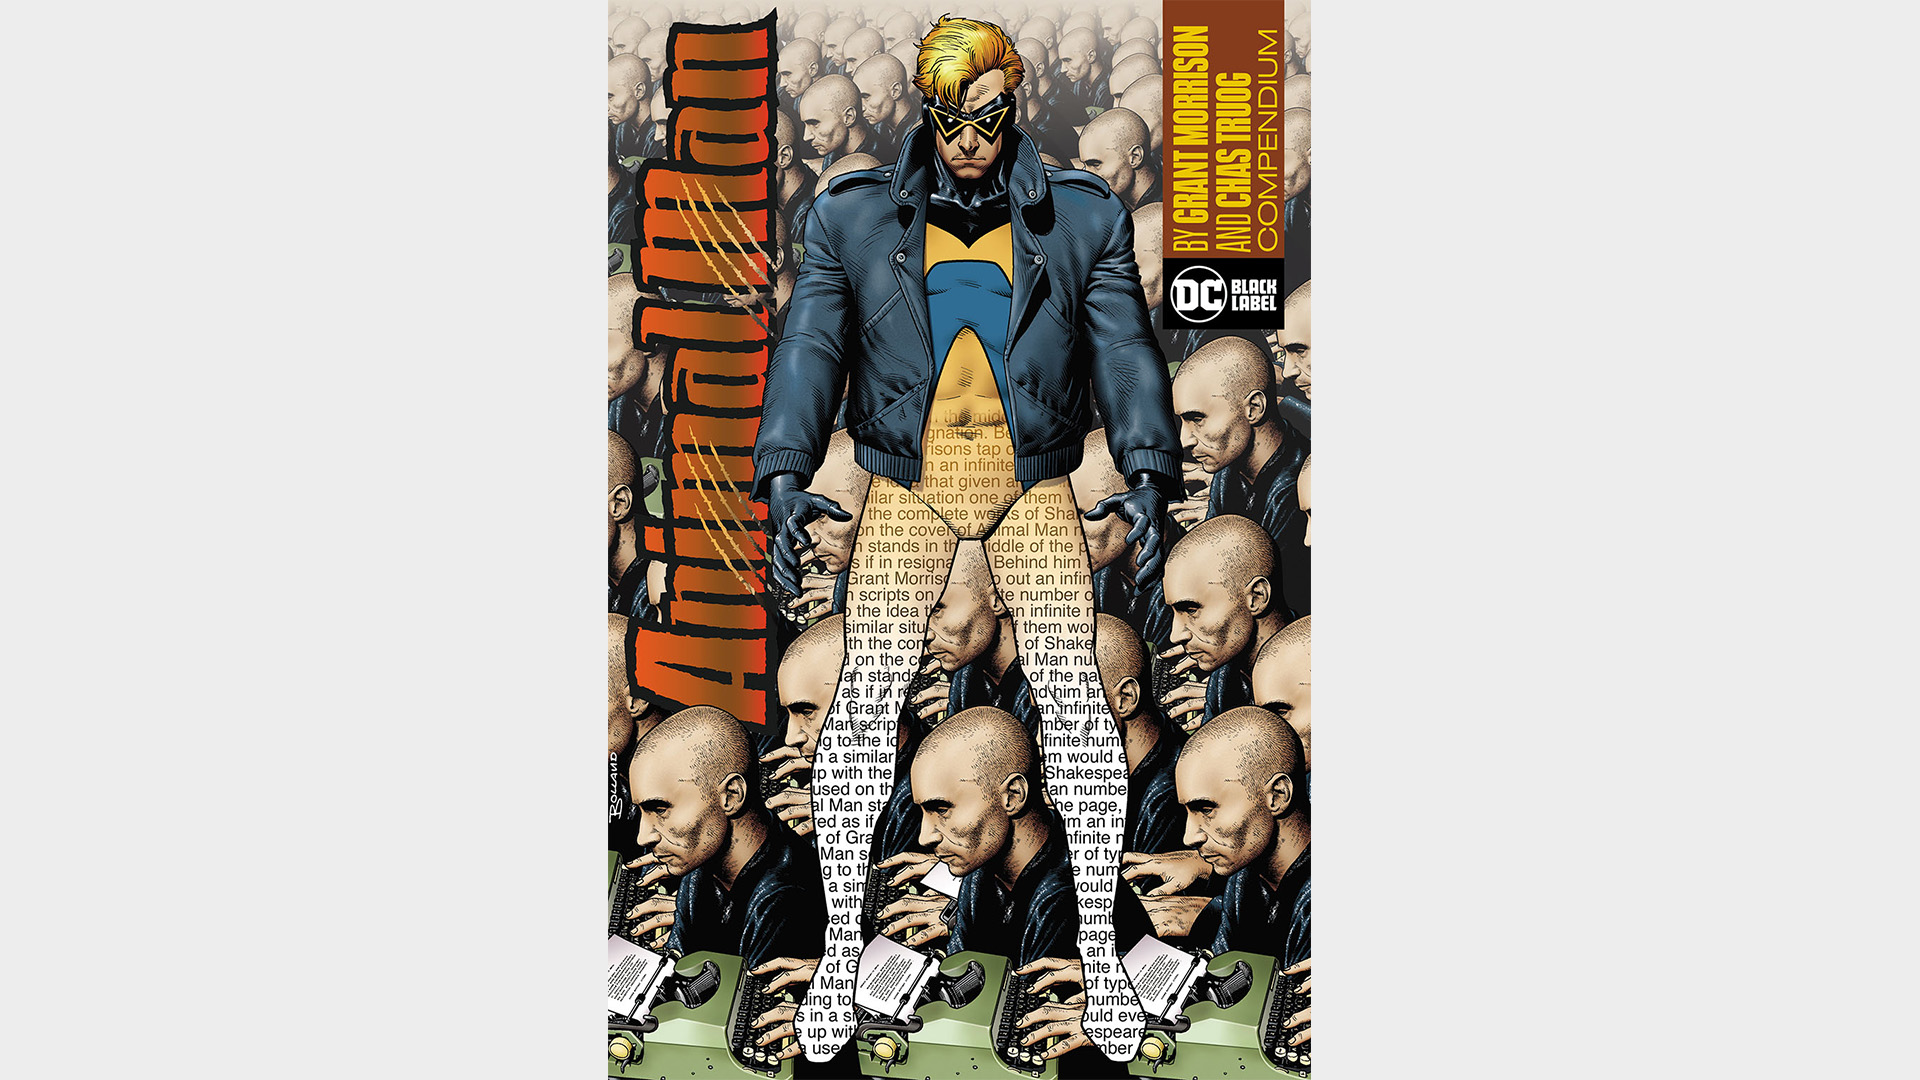 ANIMAL MAN BY GRANT MORRISON AND CHAZ TRUOG COMPENDIUM